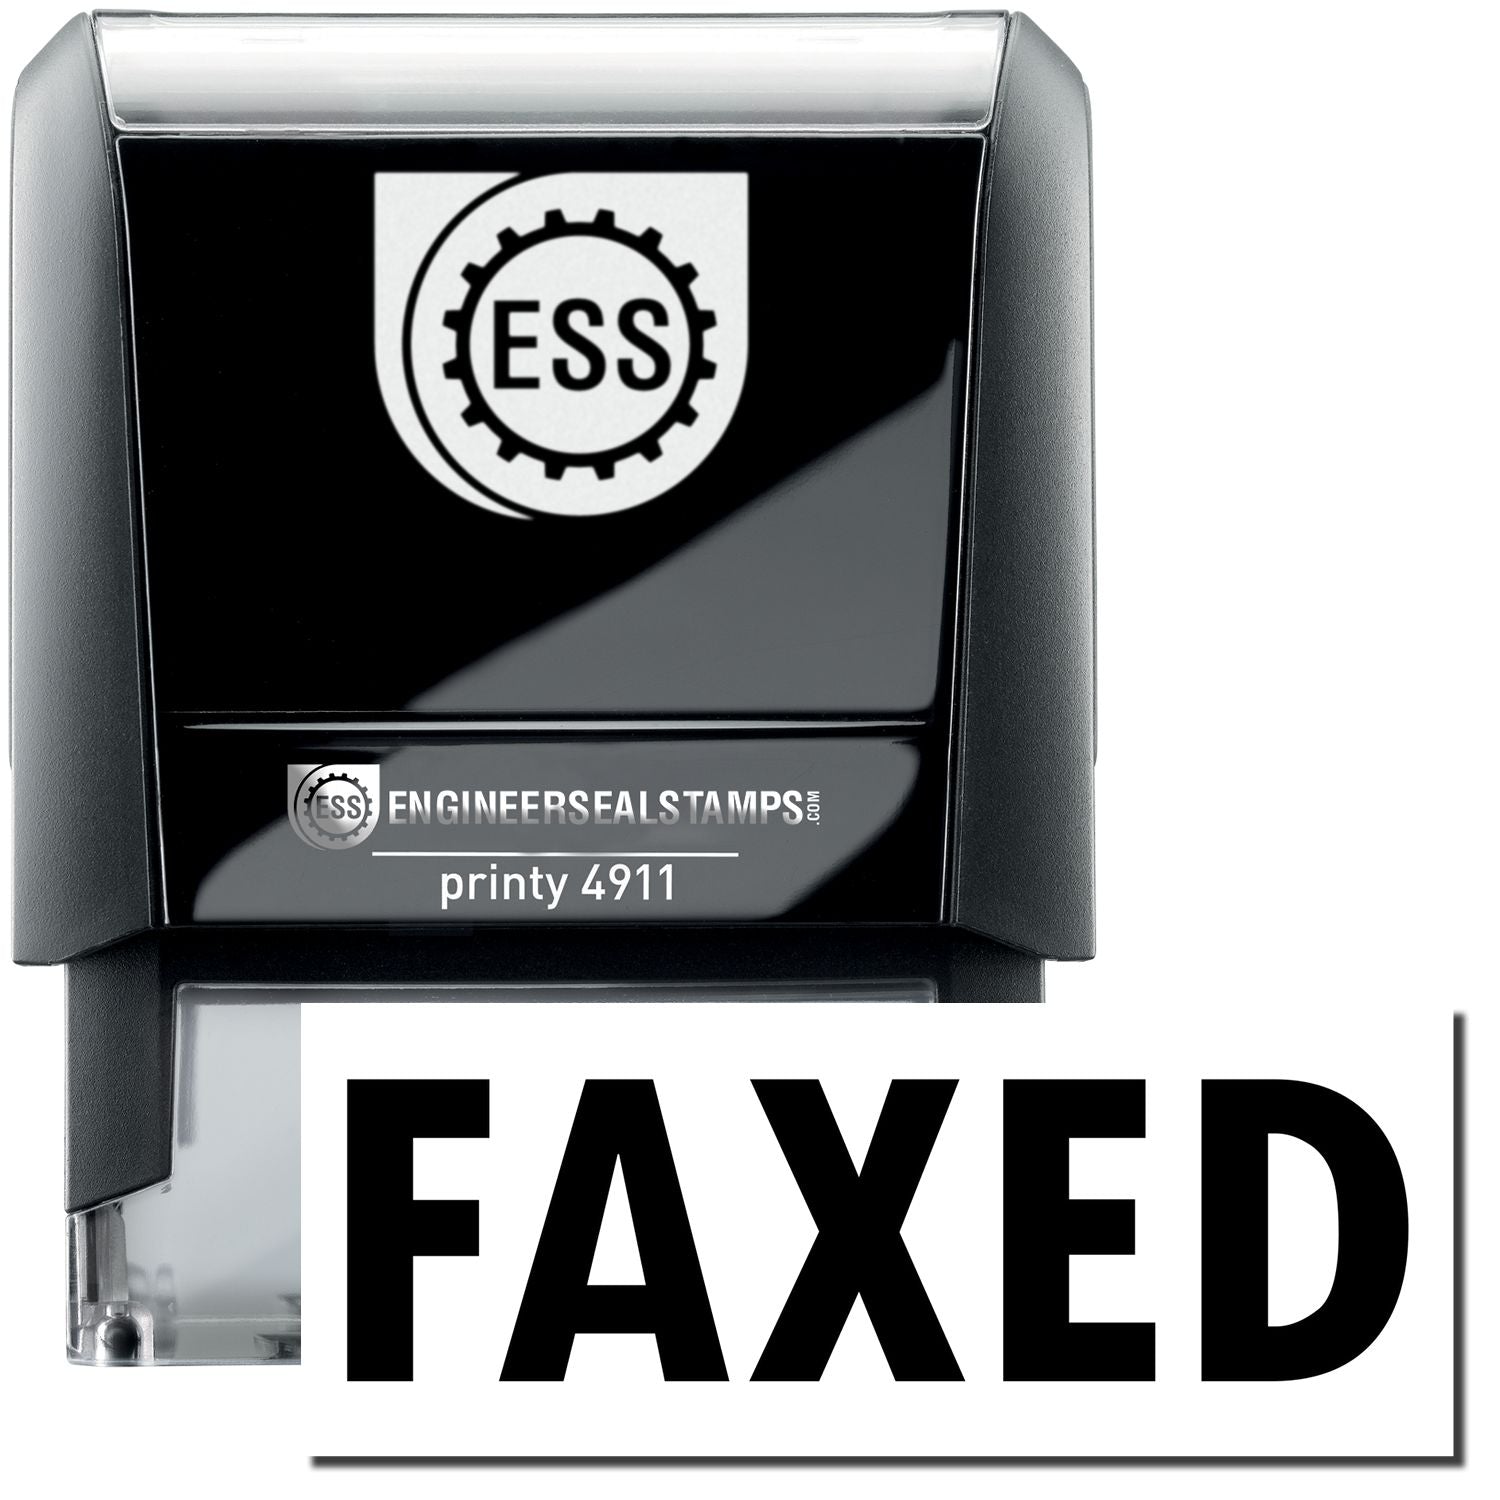 A self-inking stamp with a stamped image showing how the text "FAXED" is displayed after stamping.